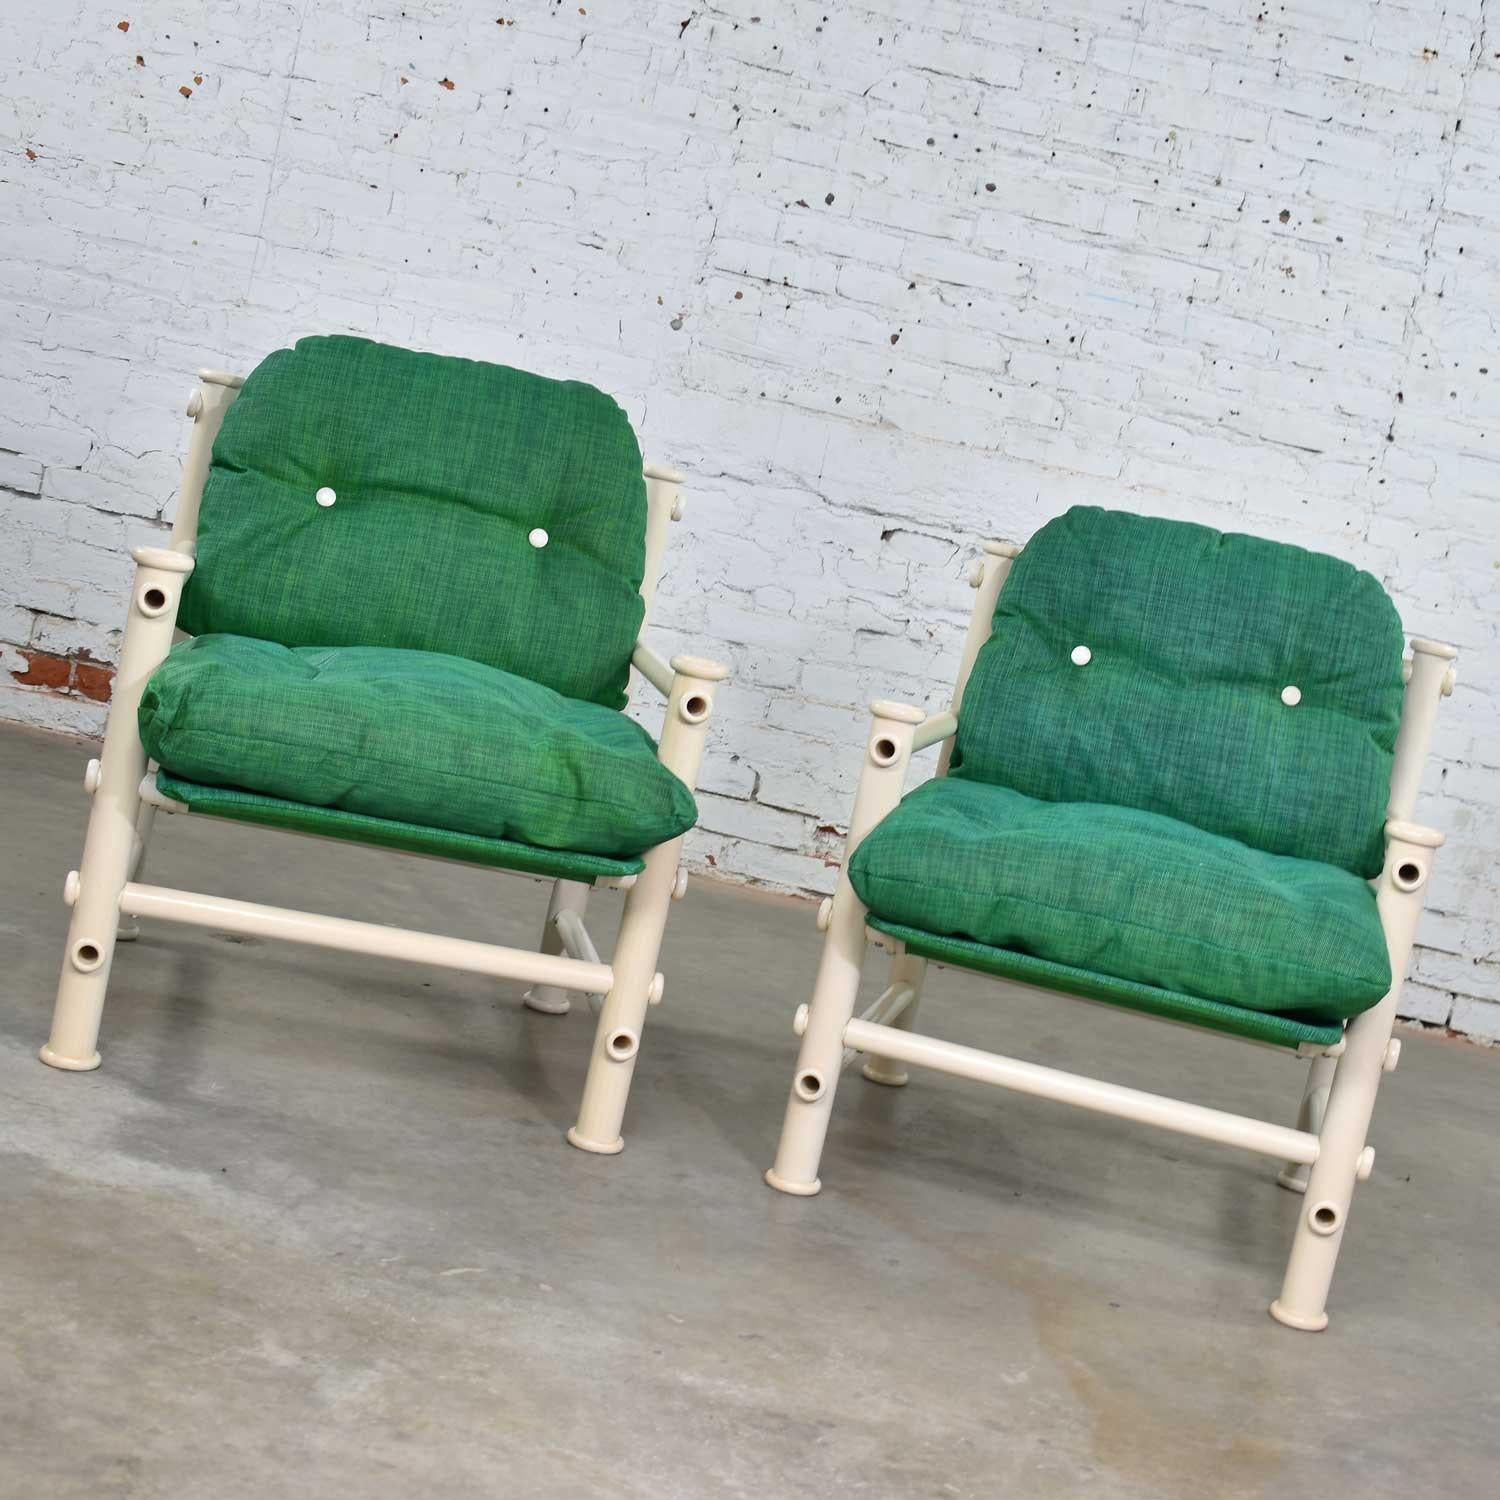 Fun and bright pair of white PVC Idyllwild outdoor lounge chairs with Kelly green mesh upholstery and sling designed by Jerry Johnson for Landes Manufacturing Co. They are in good vintage condition. There are signs of yellowing and some scratches to